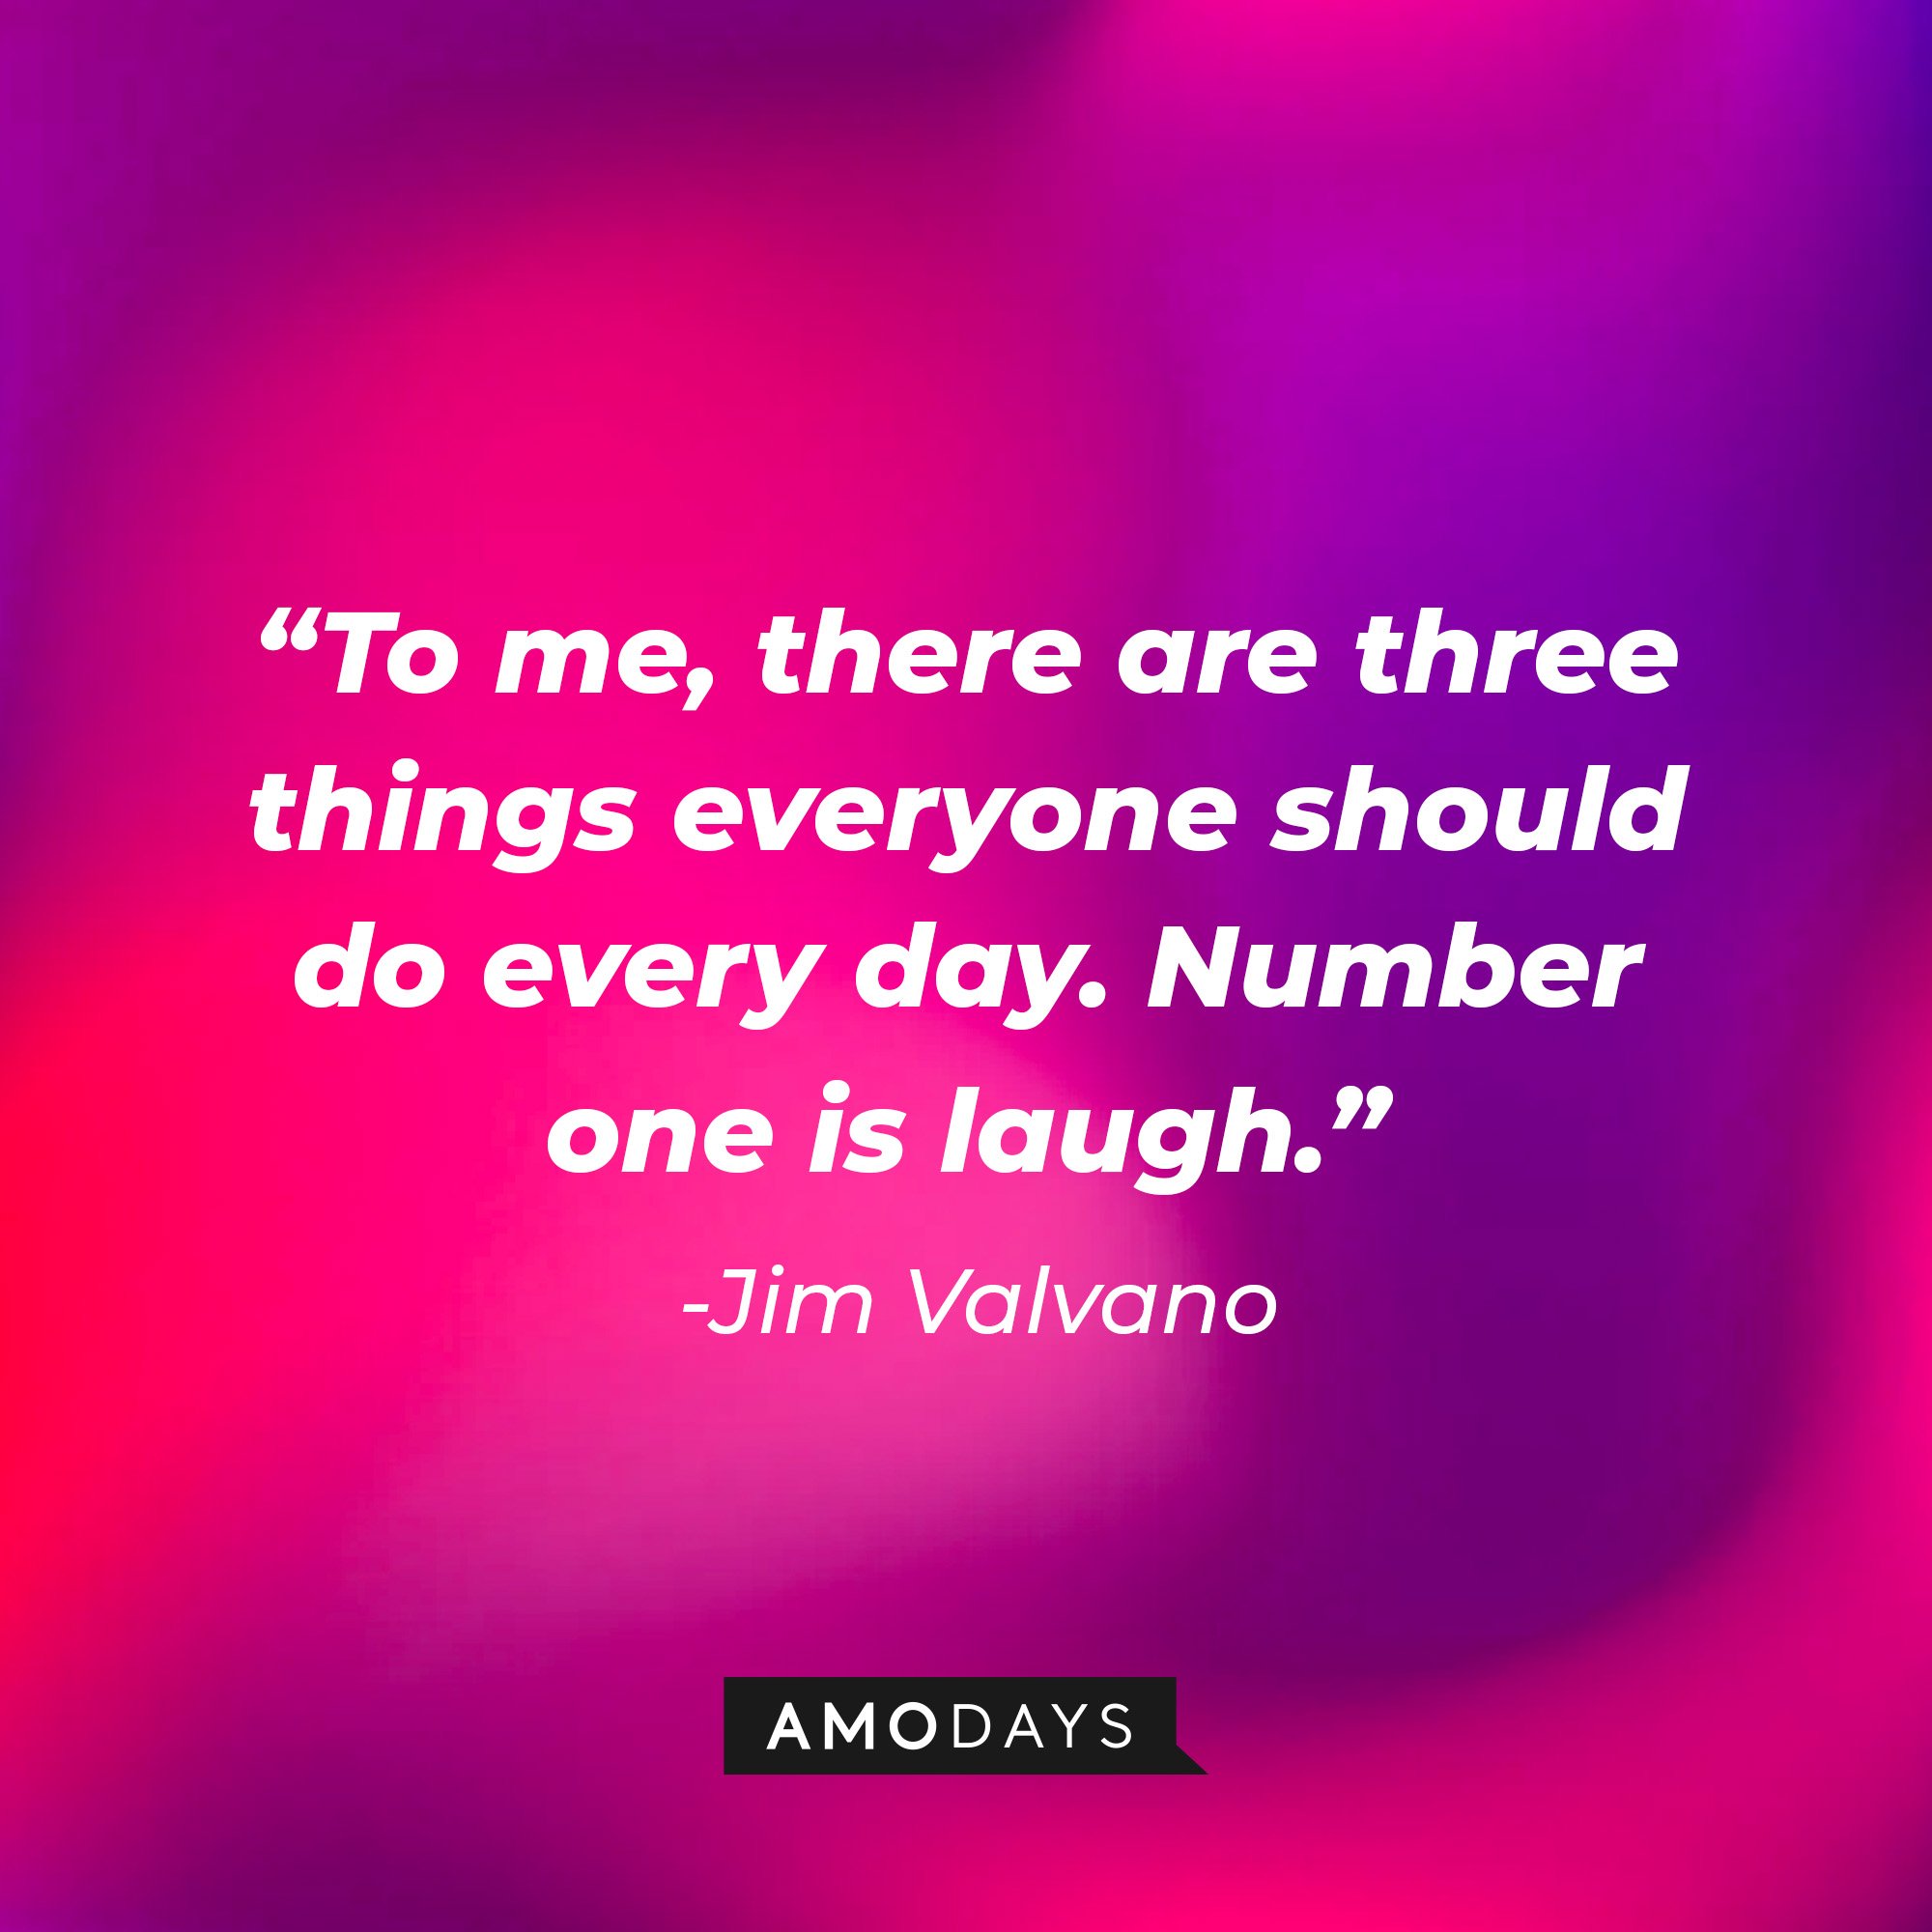  Jim Valvano’s quote: "To me, there are three things everyone should do every day. Number one is laugh." | Image: AmoDays